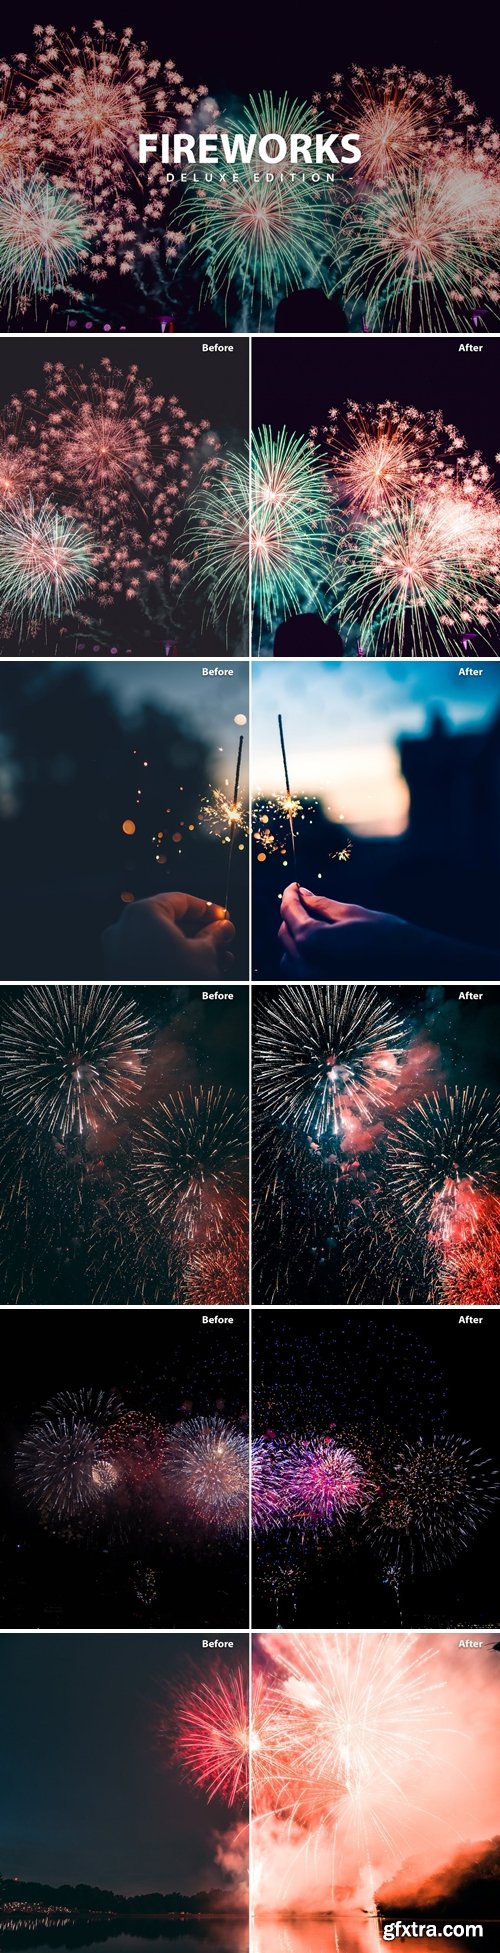 Fireworks Deluxe Edition | for Mobile and Desktop